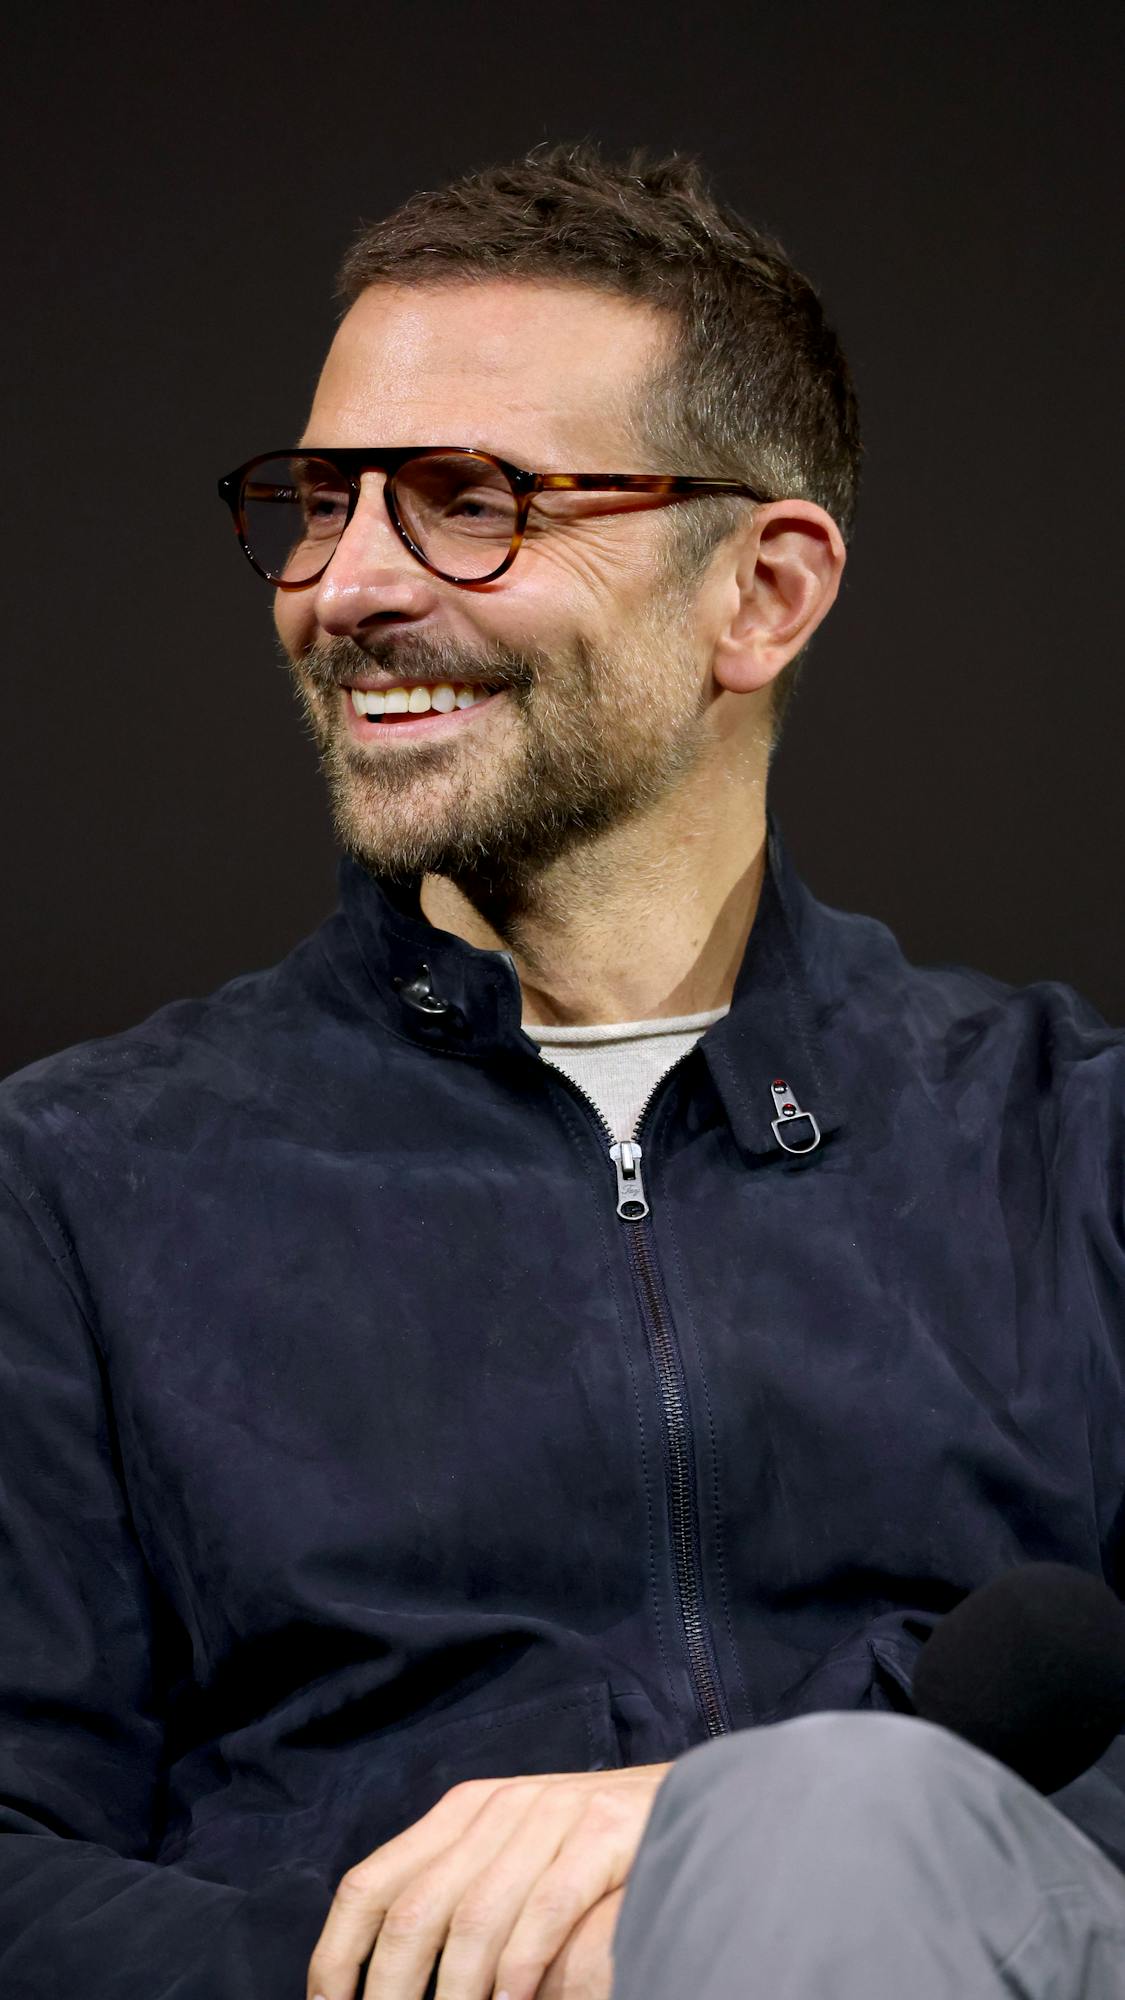 Bradley Cooper wears a navy jacket and brown glasses.